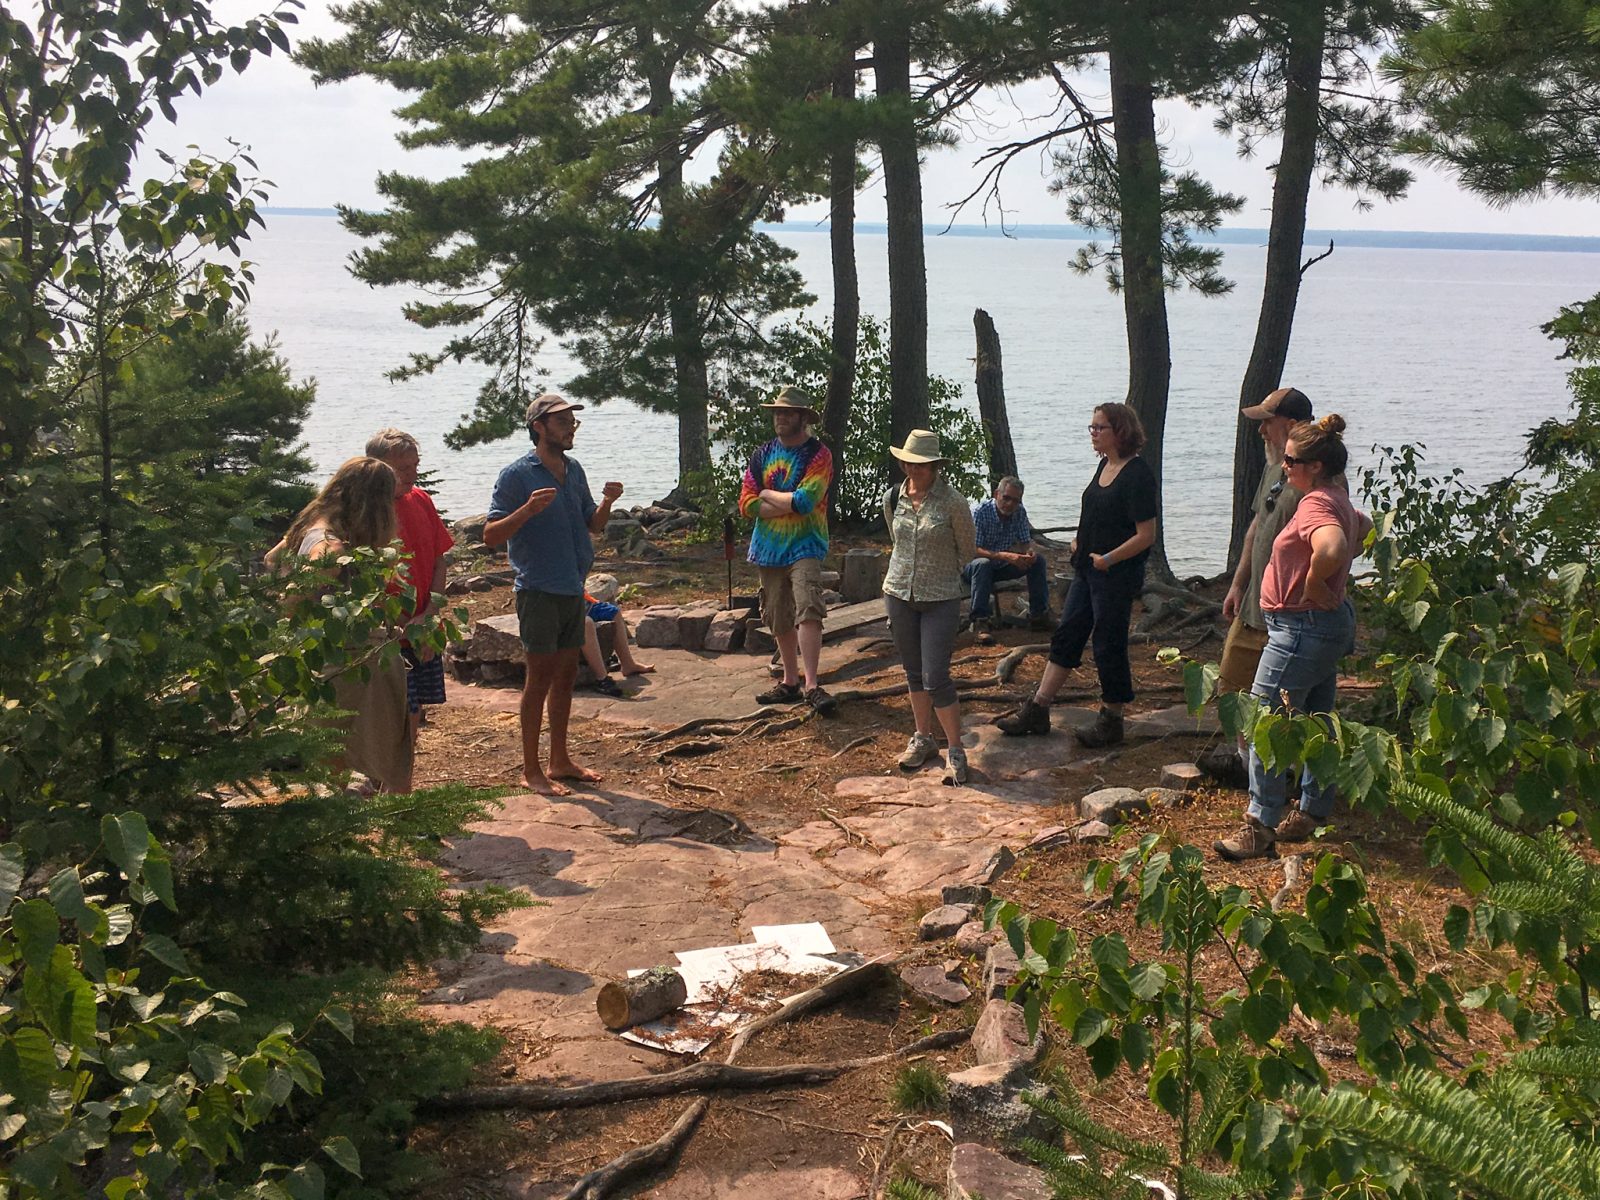 A group of visitors gathering around to listen to a resident artist talk about their practice. Rabbit Island main campfire area, sandstone ground surrounded by native white pine trees with Lake Superior in the background.